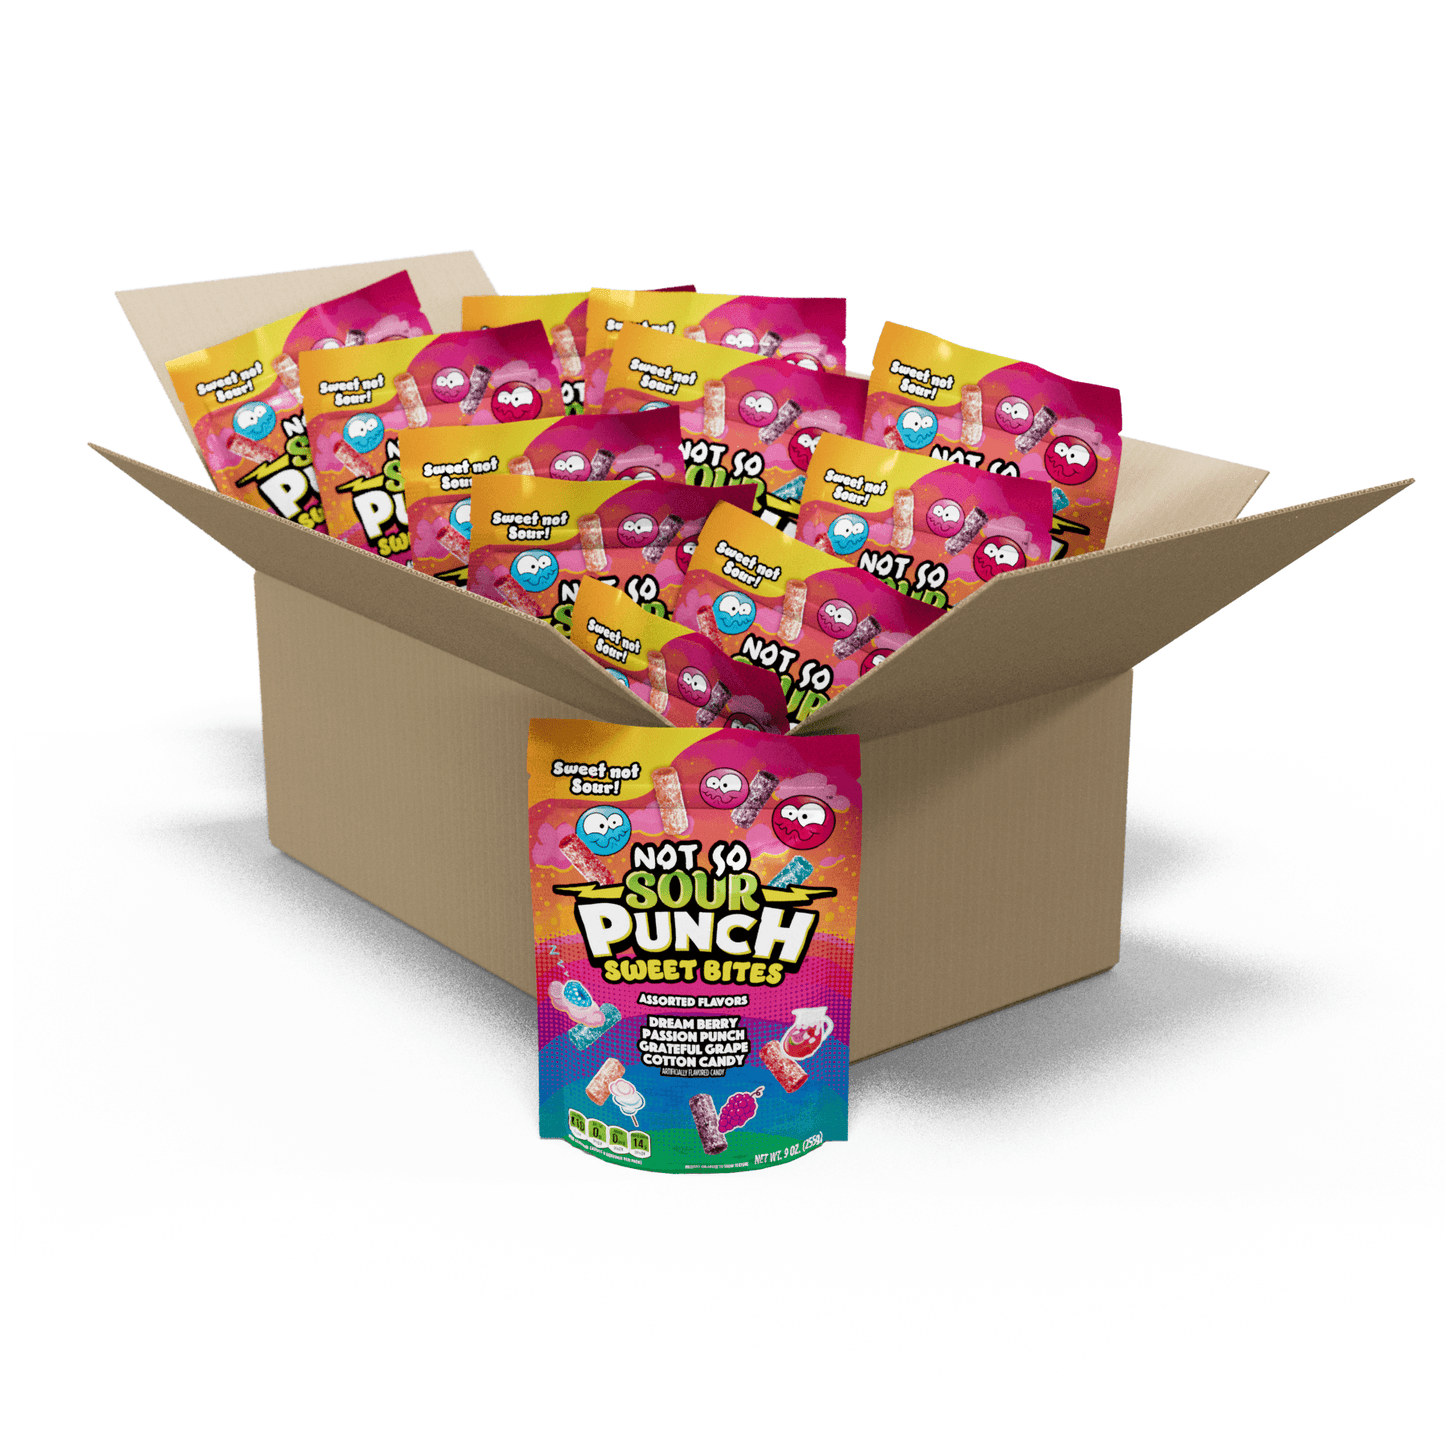 12 count bulk candy box of Not So SOUR PUNCH Sweet Bites 9oz bags